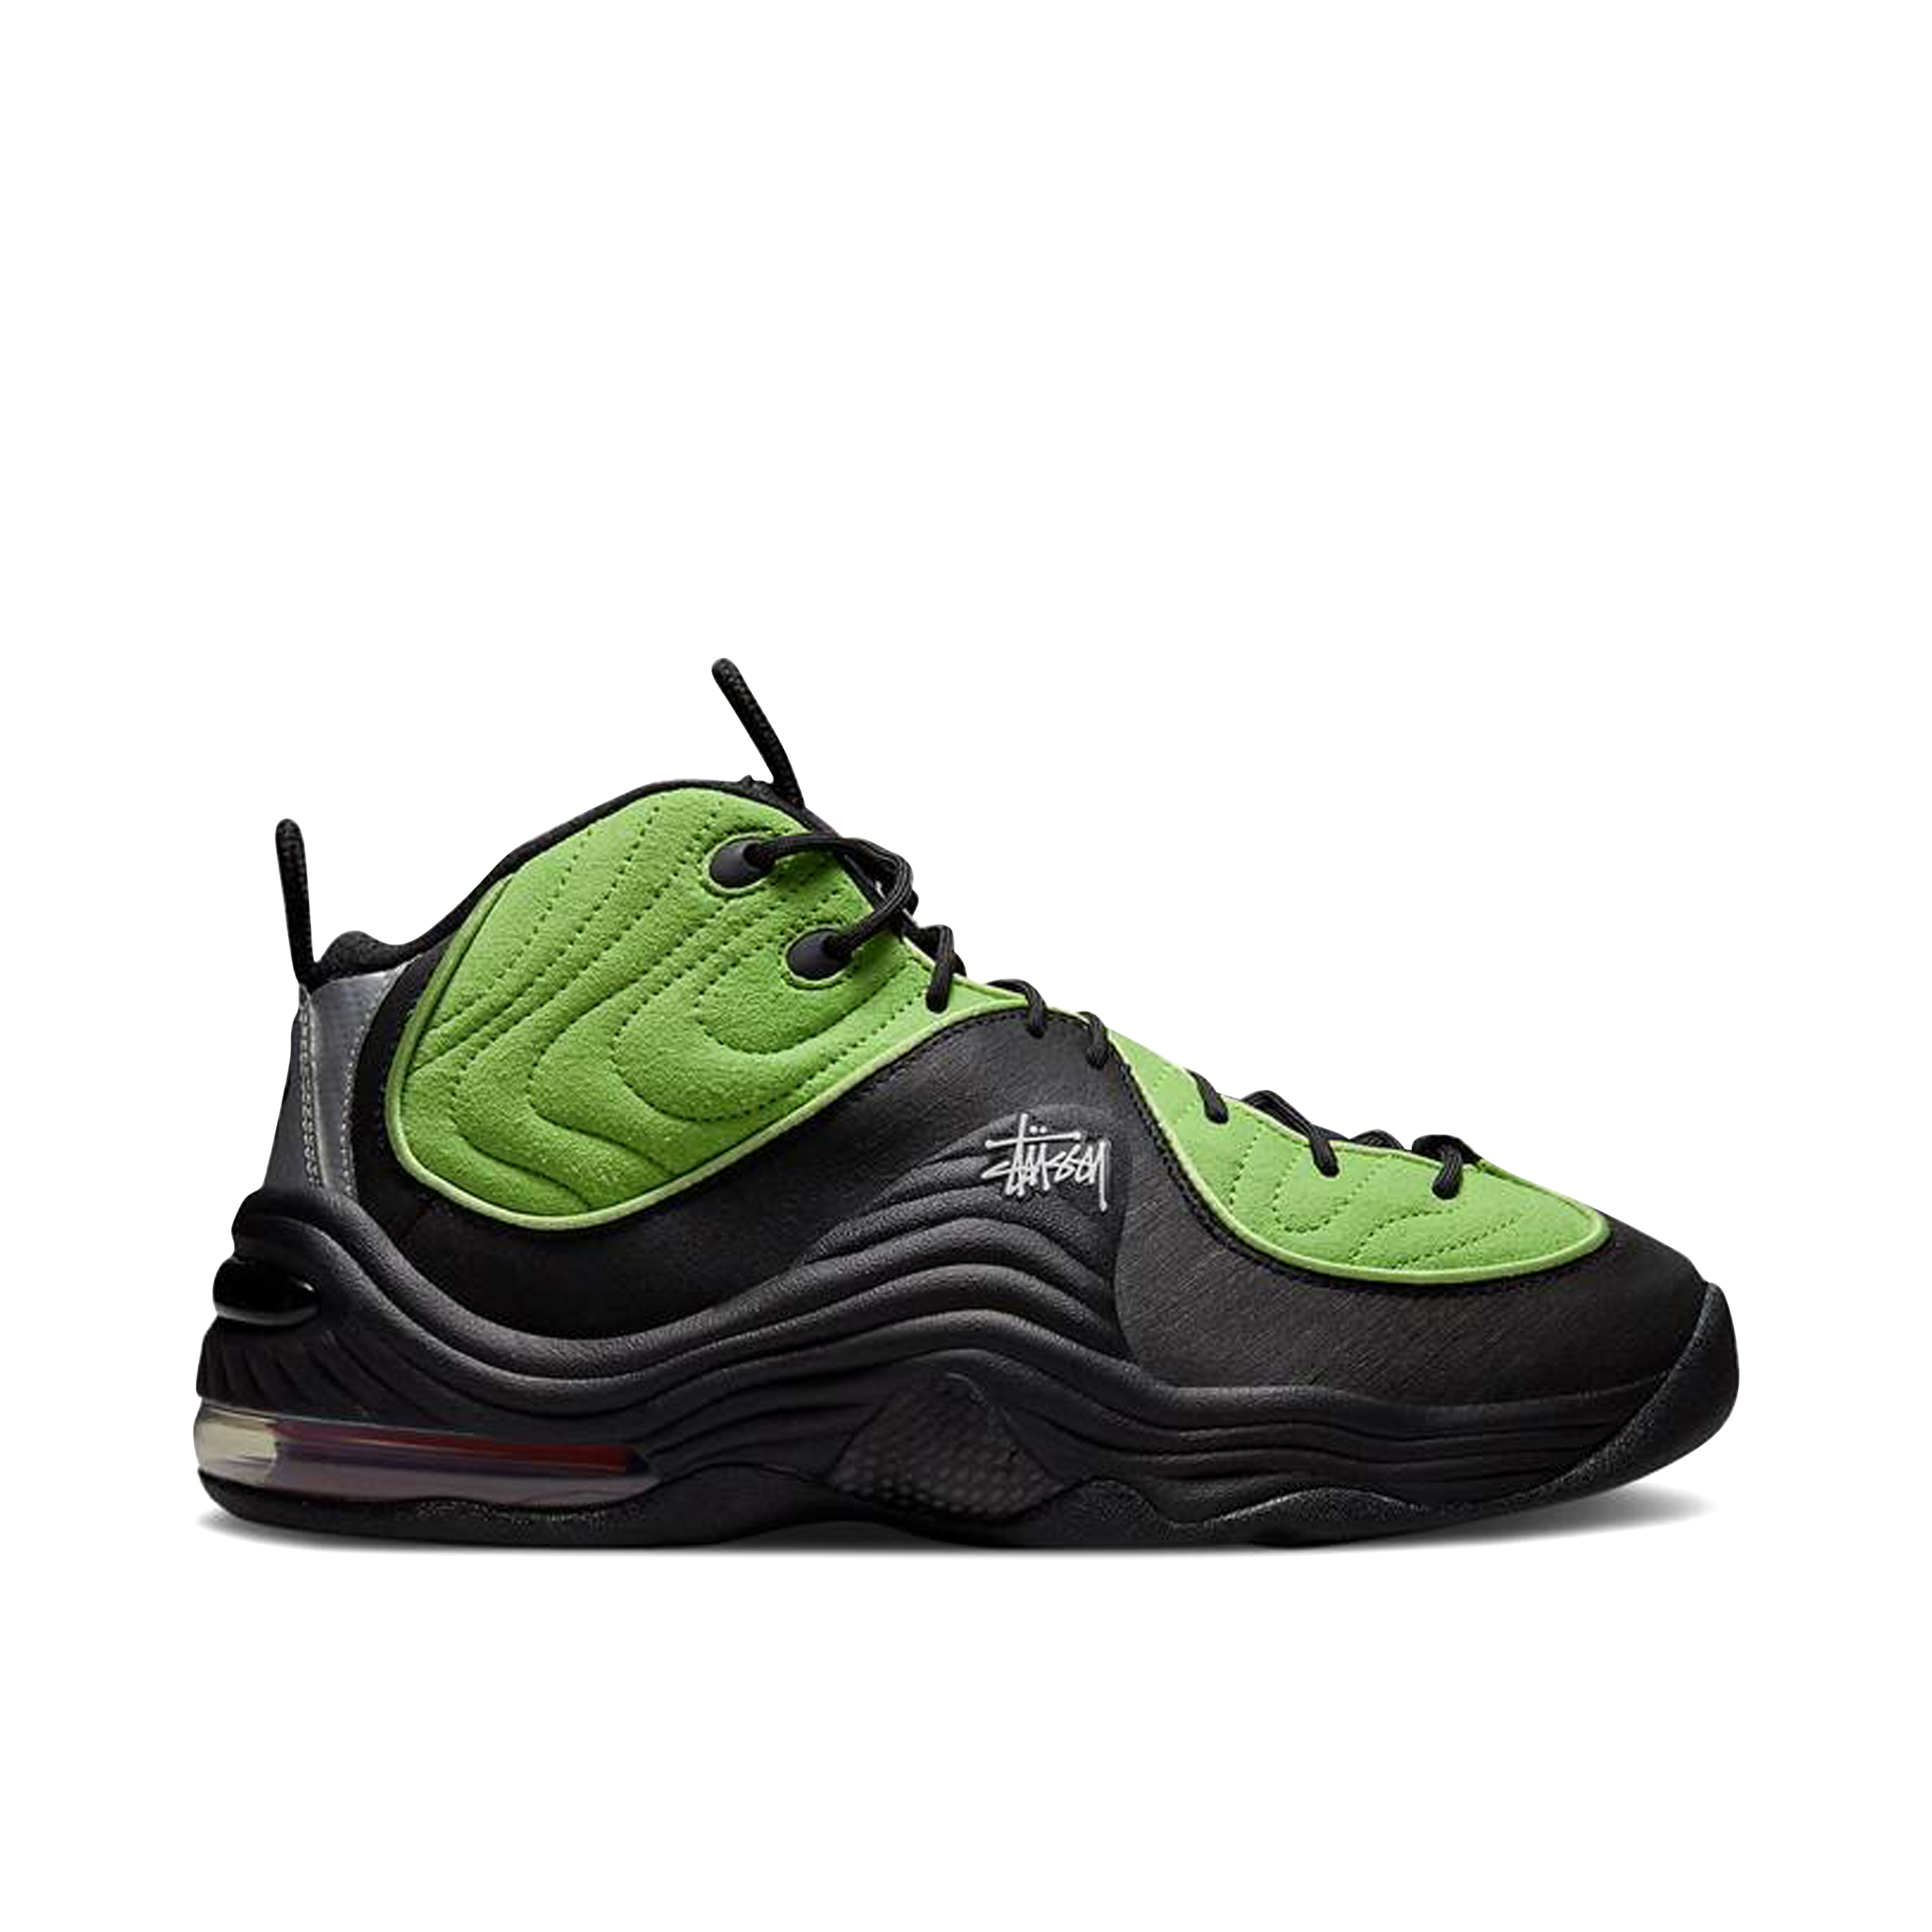 Nike Air Max Penny 2 x Stussy Black Green | DX6933-300 | Laced